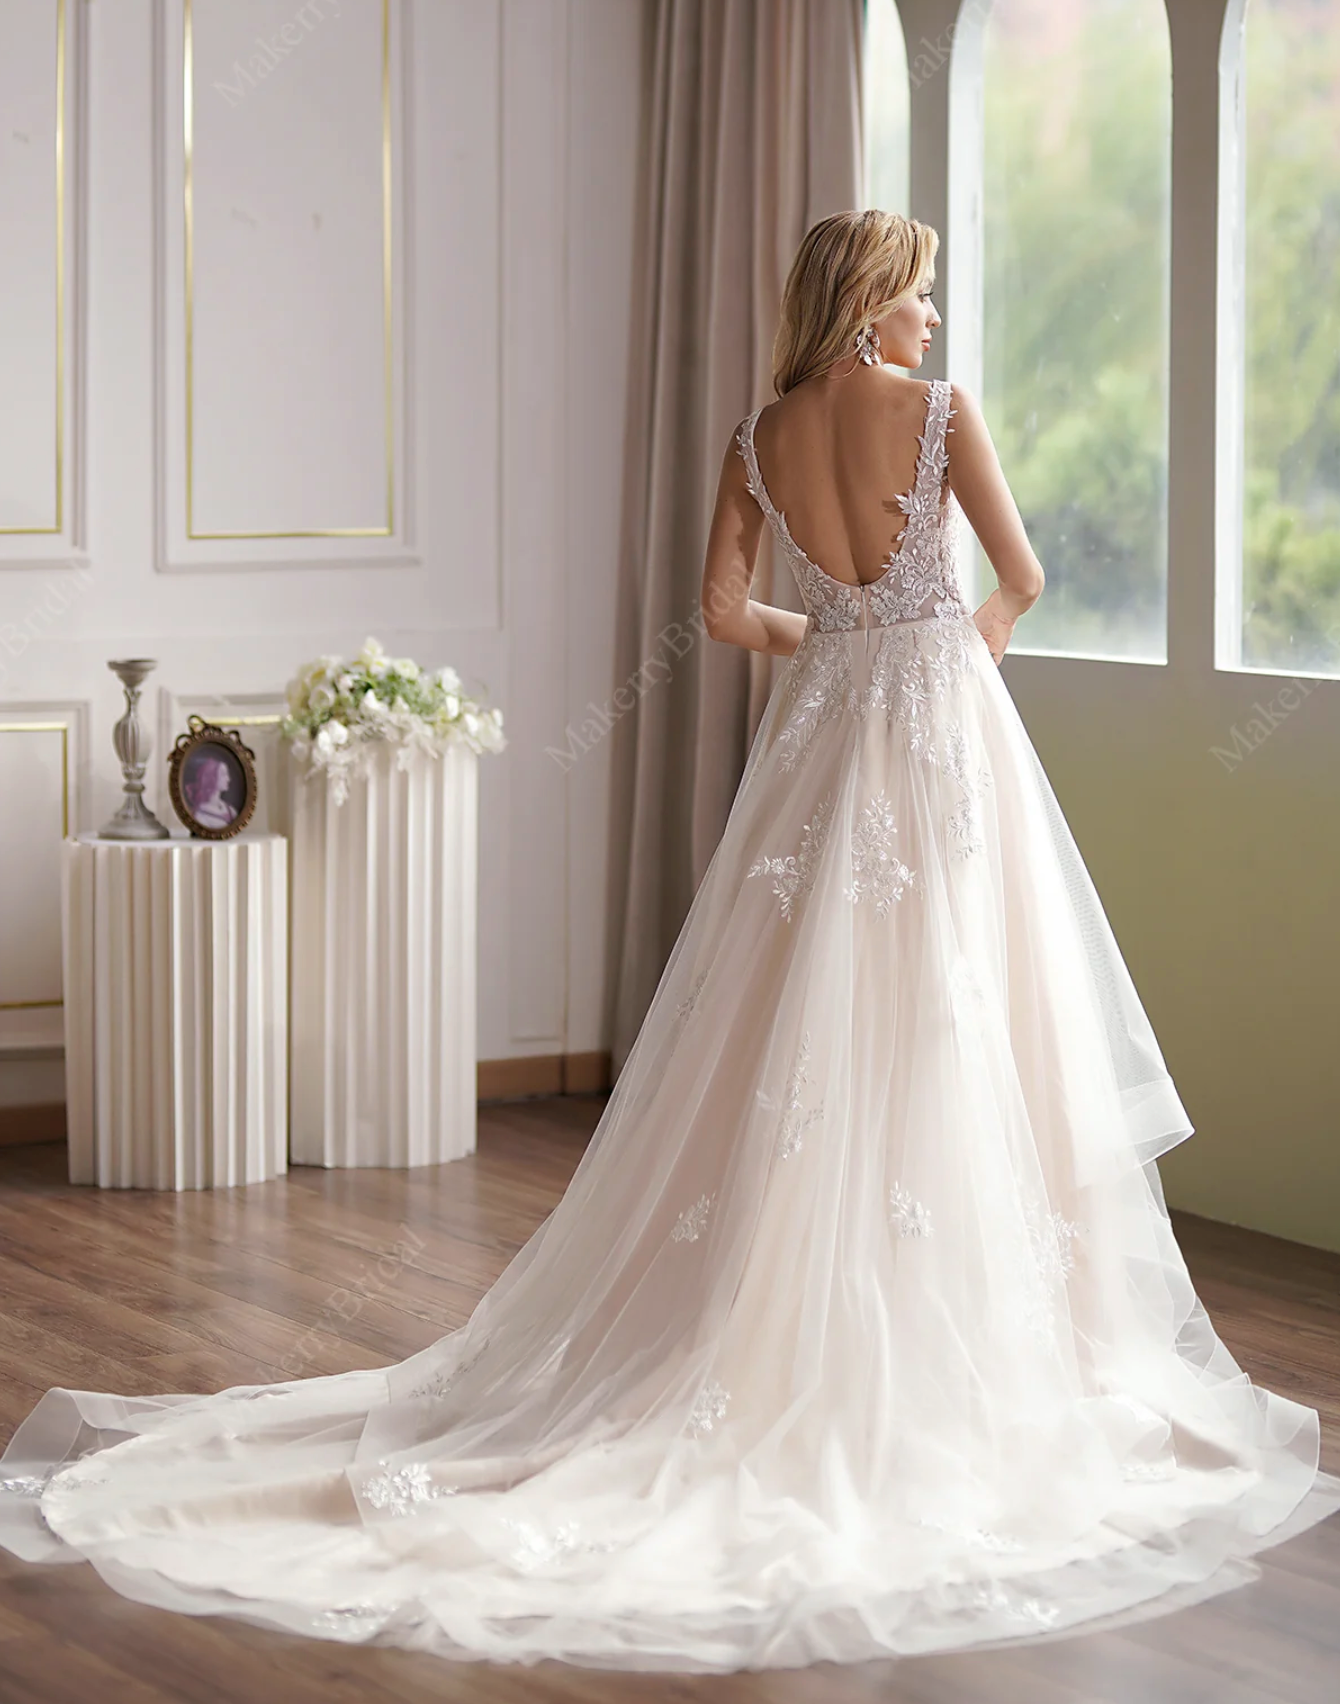 Beaded Plunging Neckline Illusion Lace Tulle Wedding Gown - Lunss